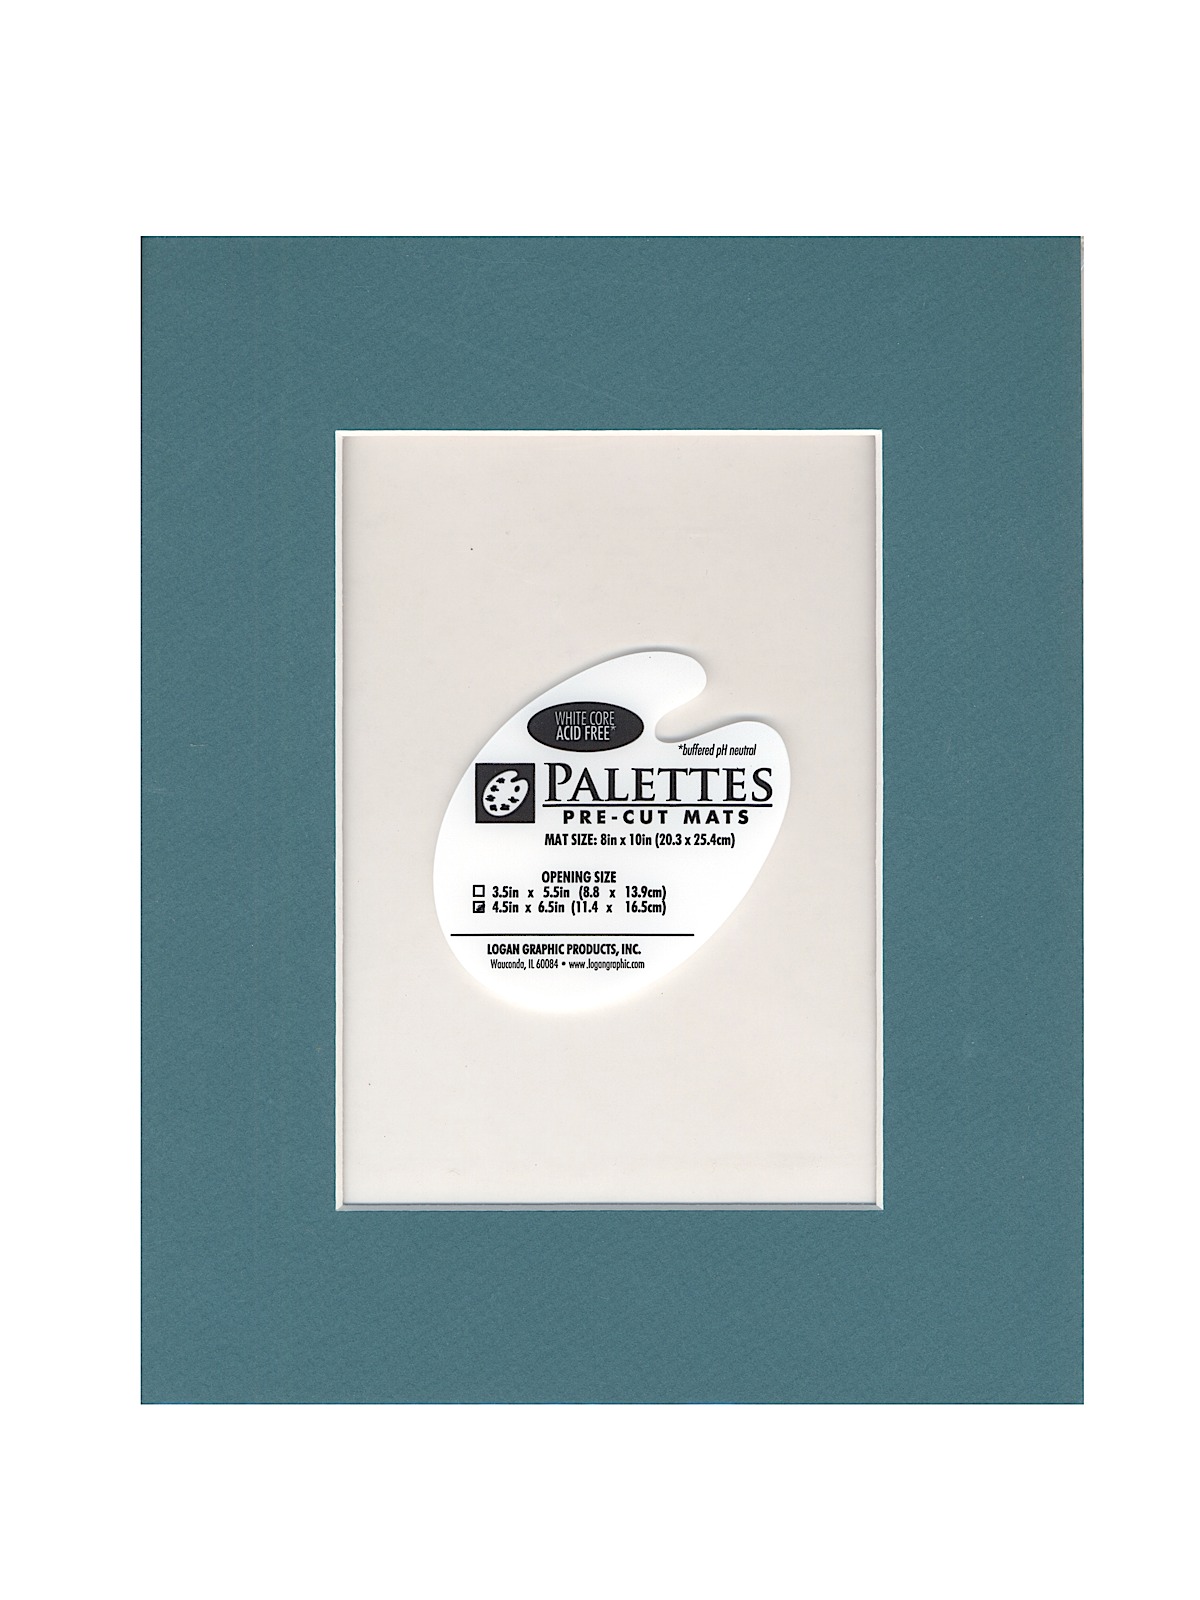 Palettes Pre-cut Mats Rectangle Teal 11 In. X 14 In.